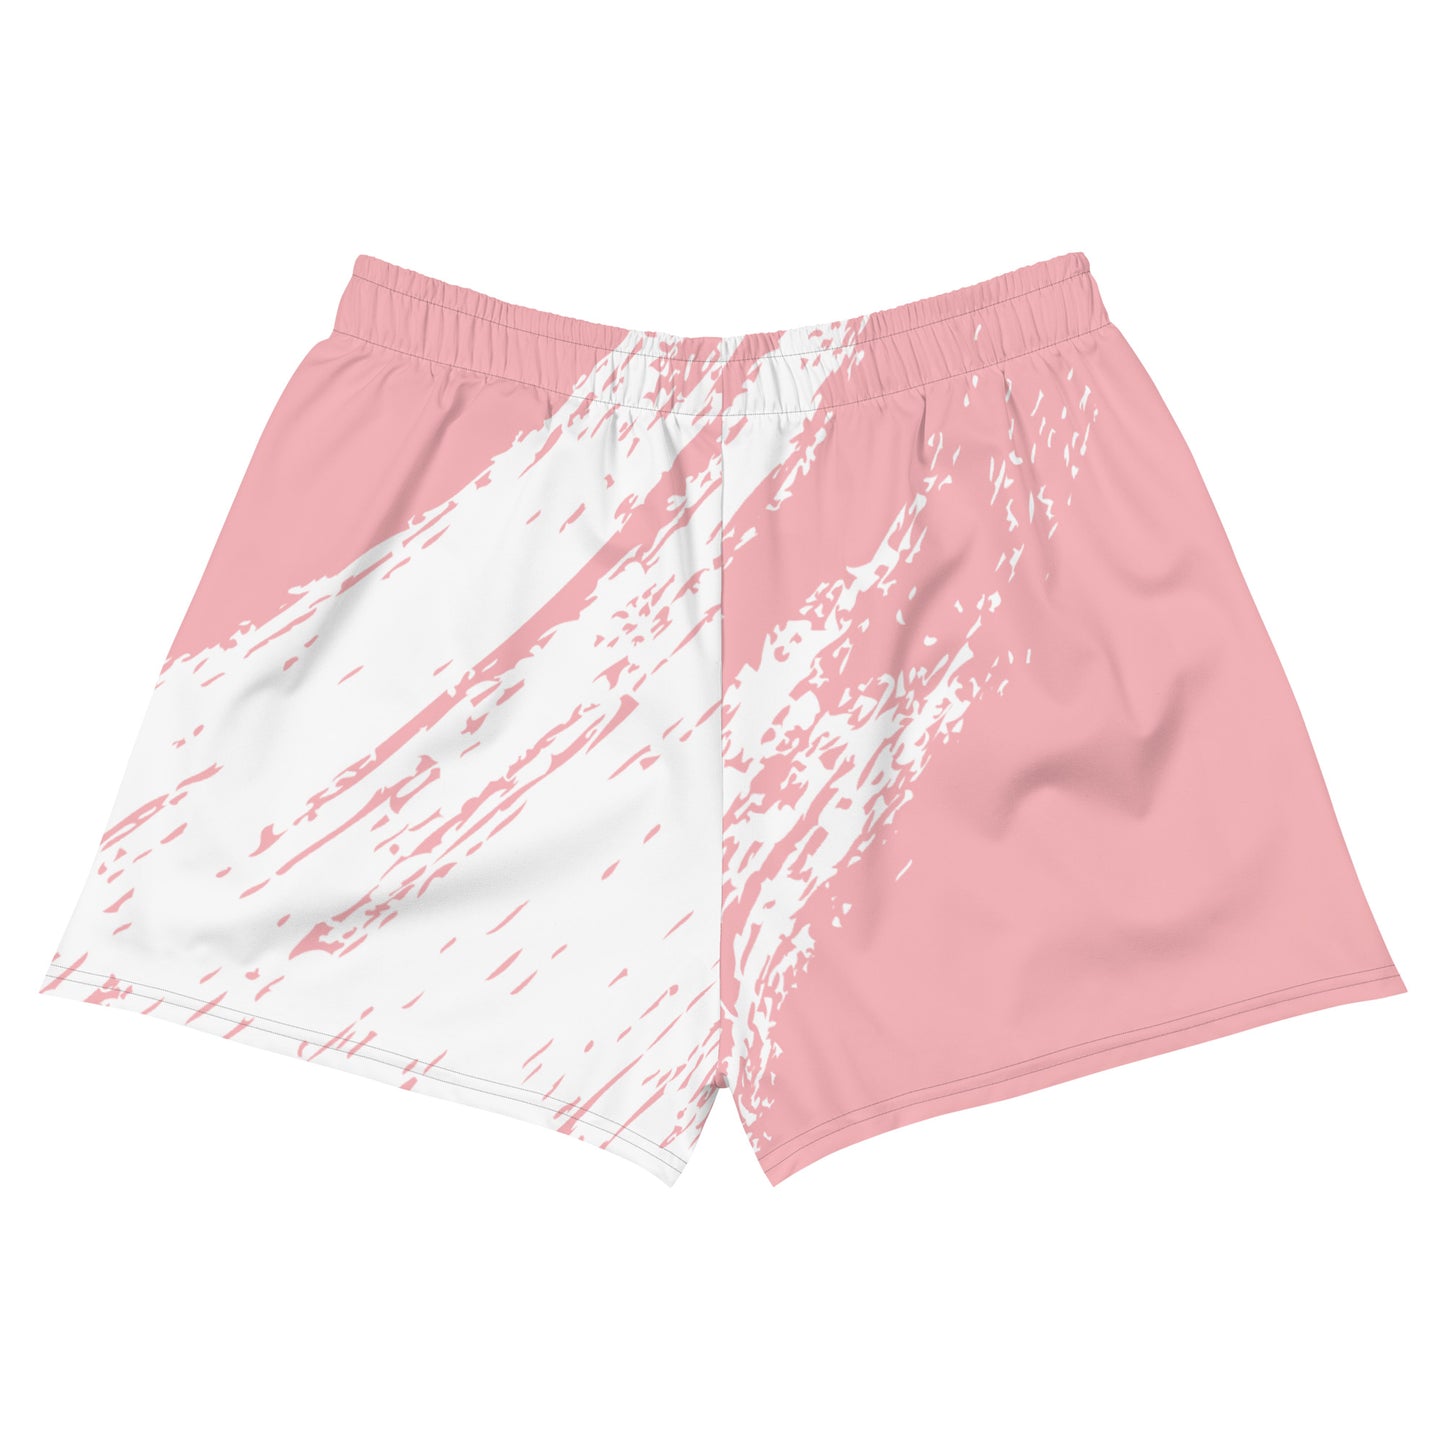 2Bdiscontinued. women’s athletic shorts pnkrcr